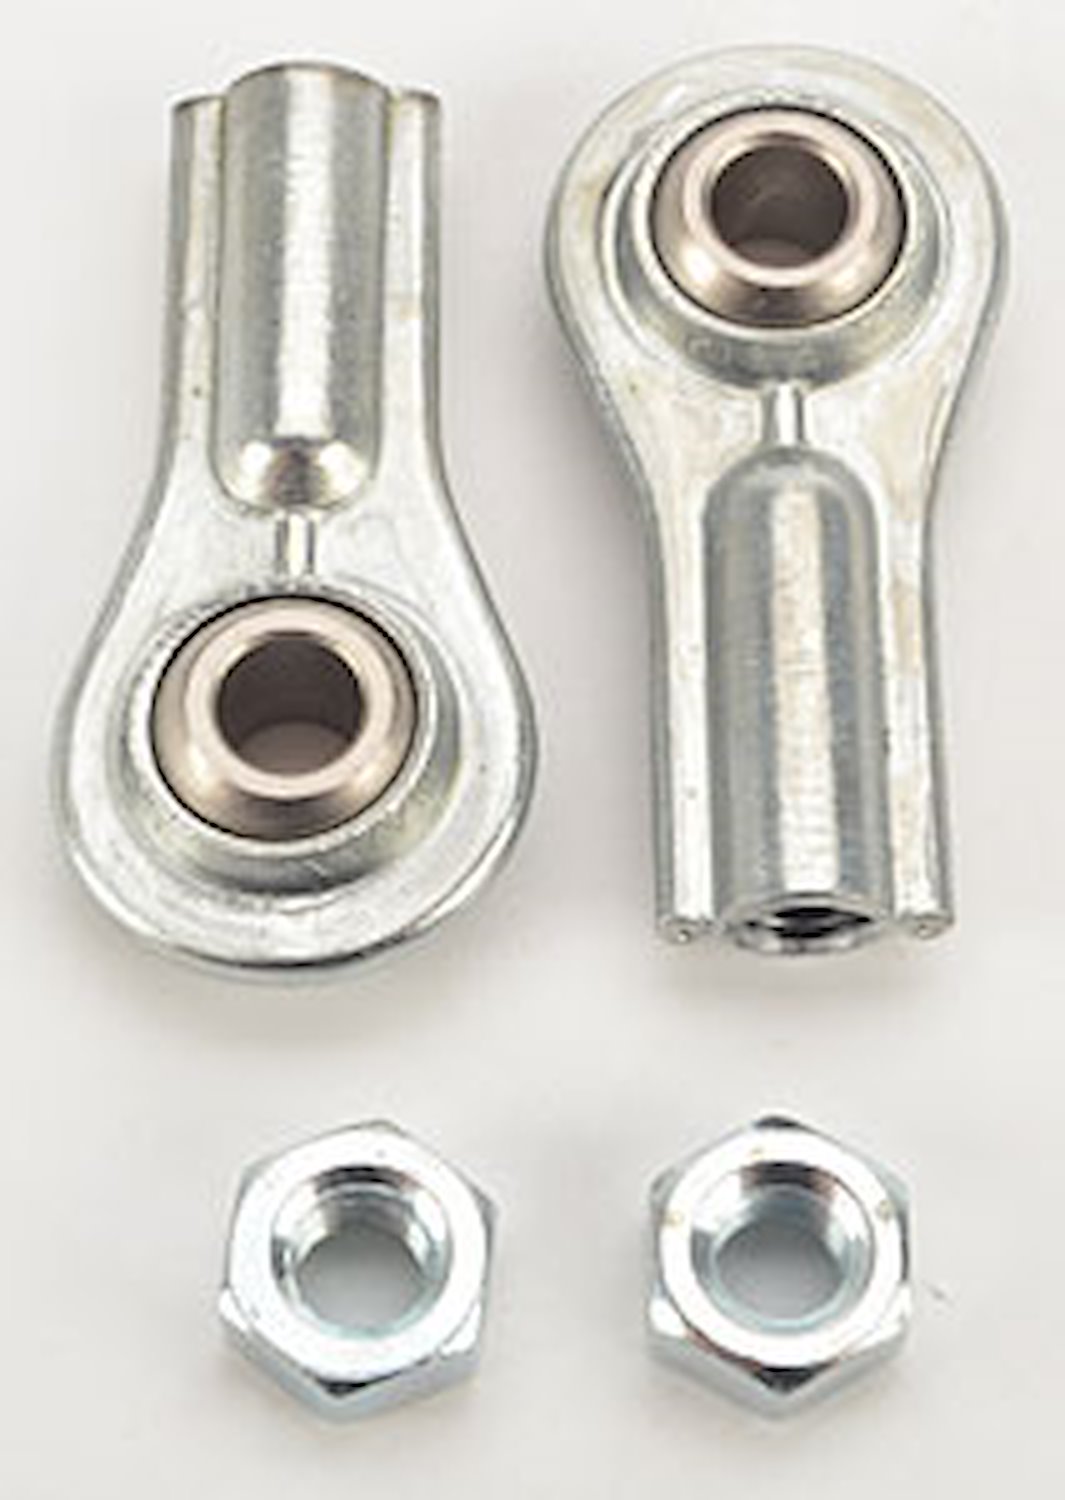 Rod Ends 1/4"